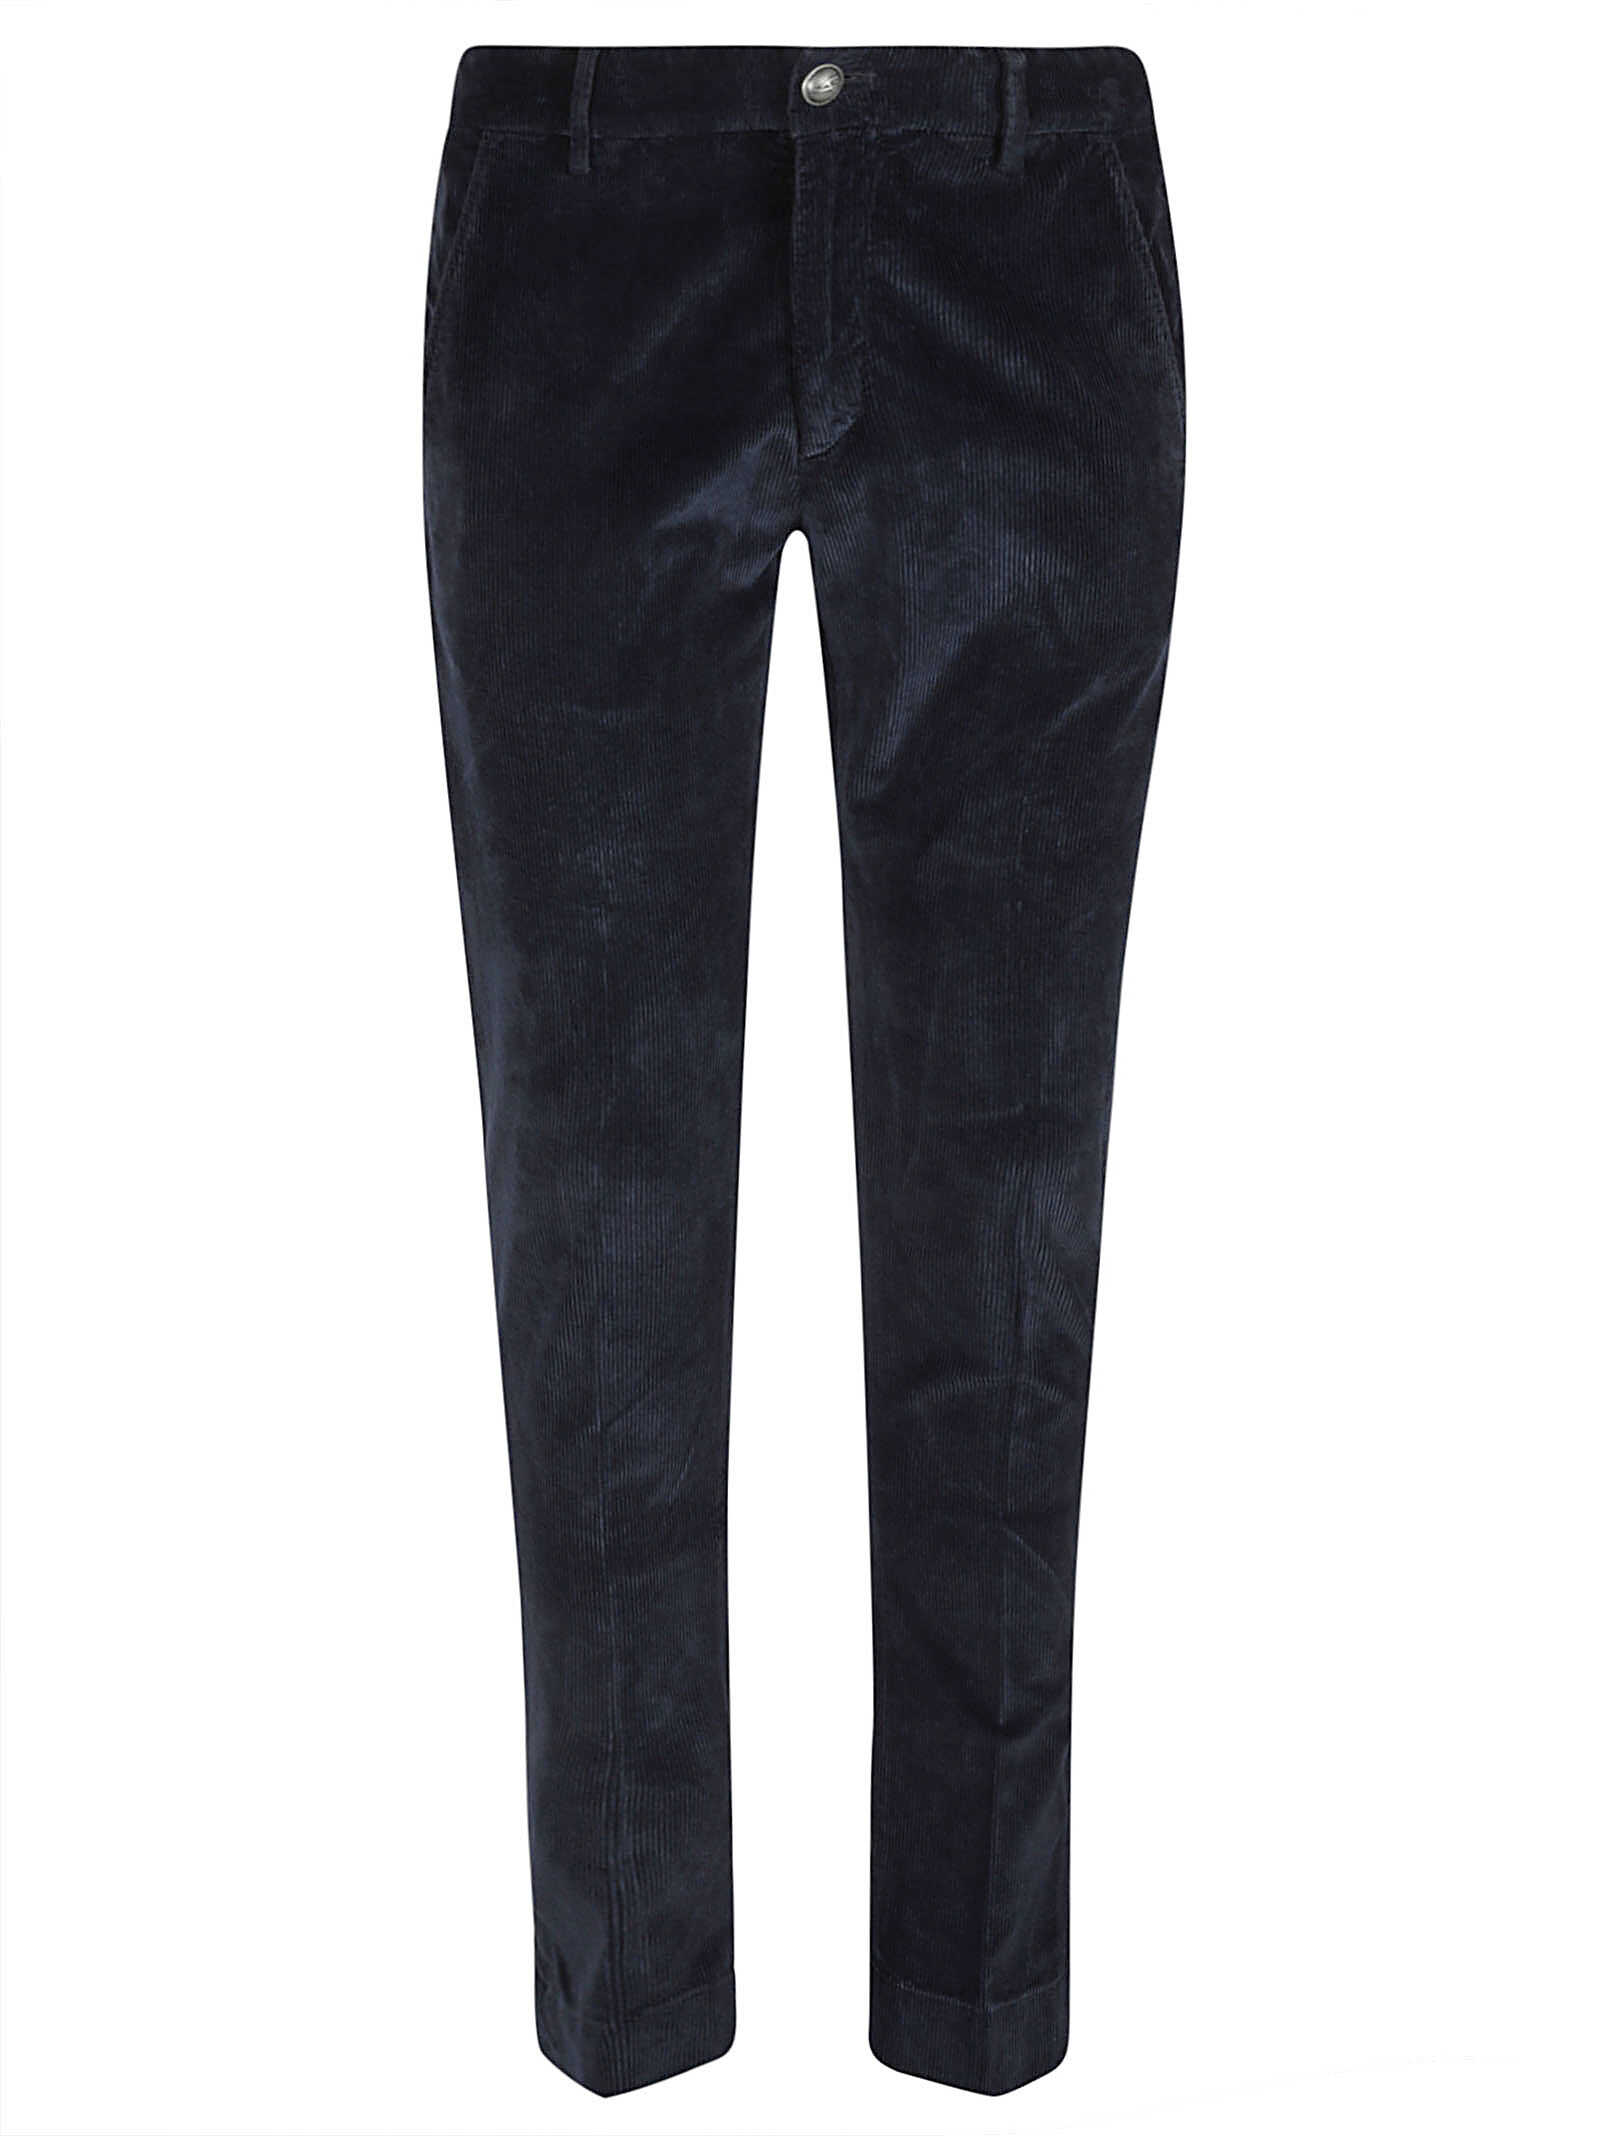 HANDPICKED Hand Picked Trousers Blue Blue